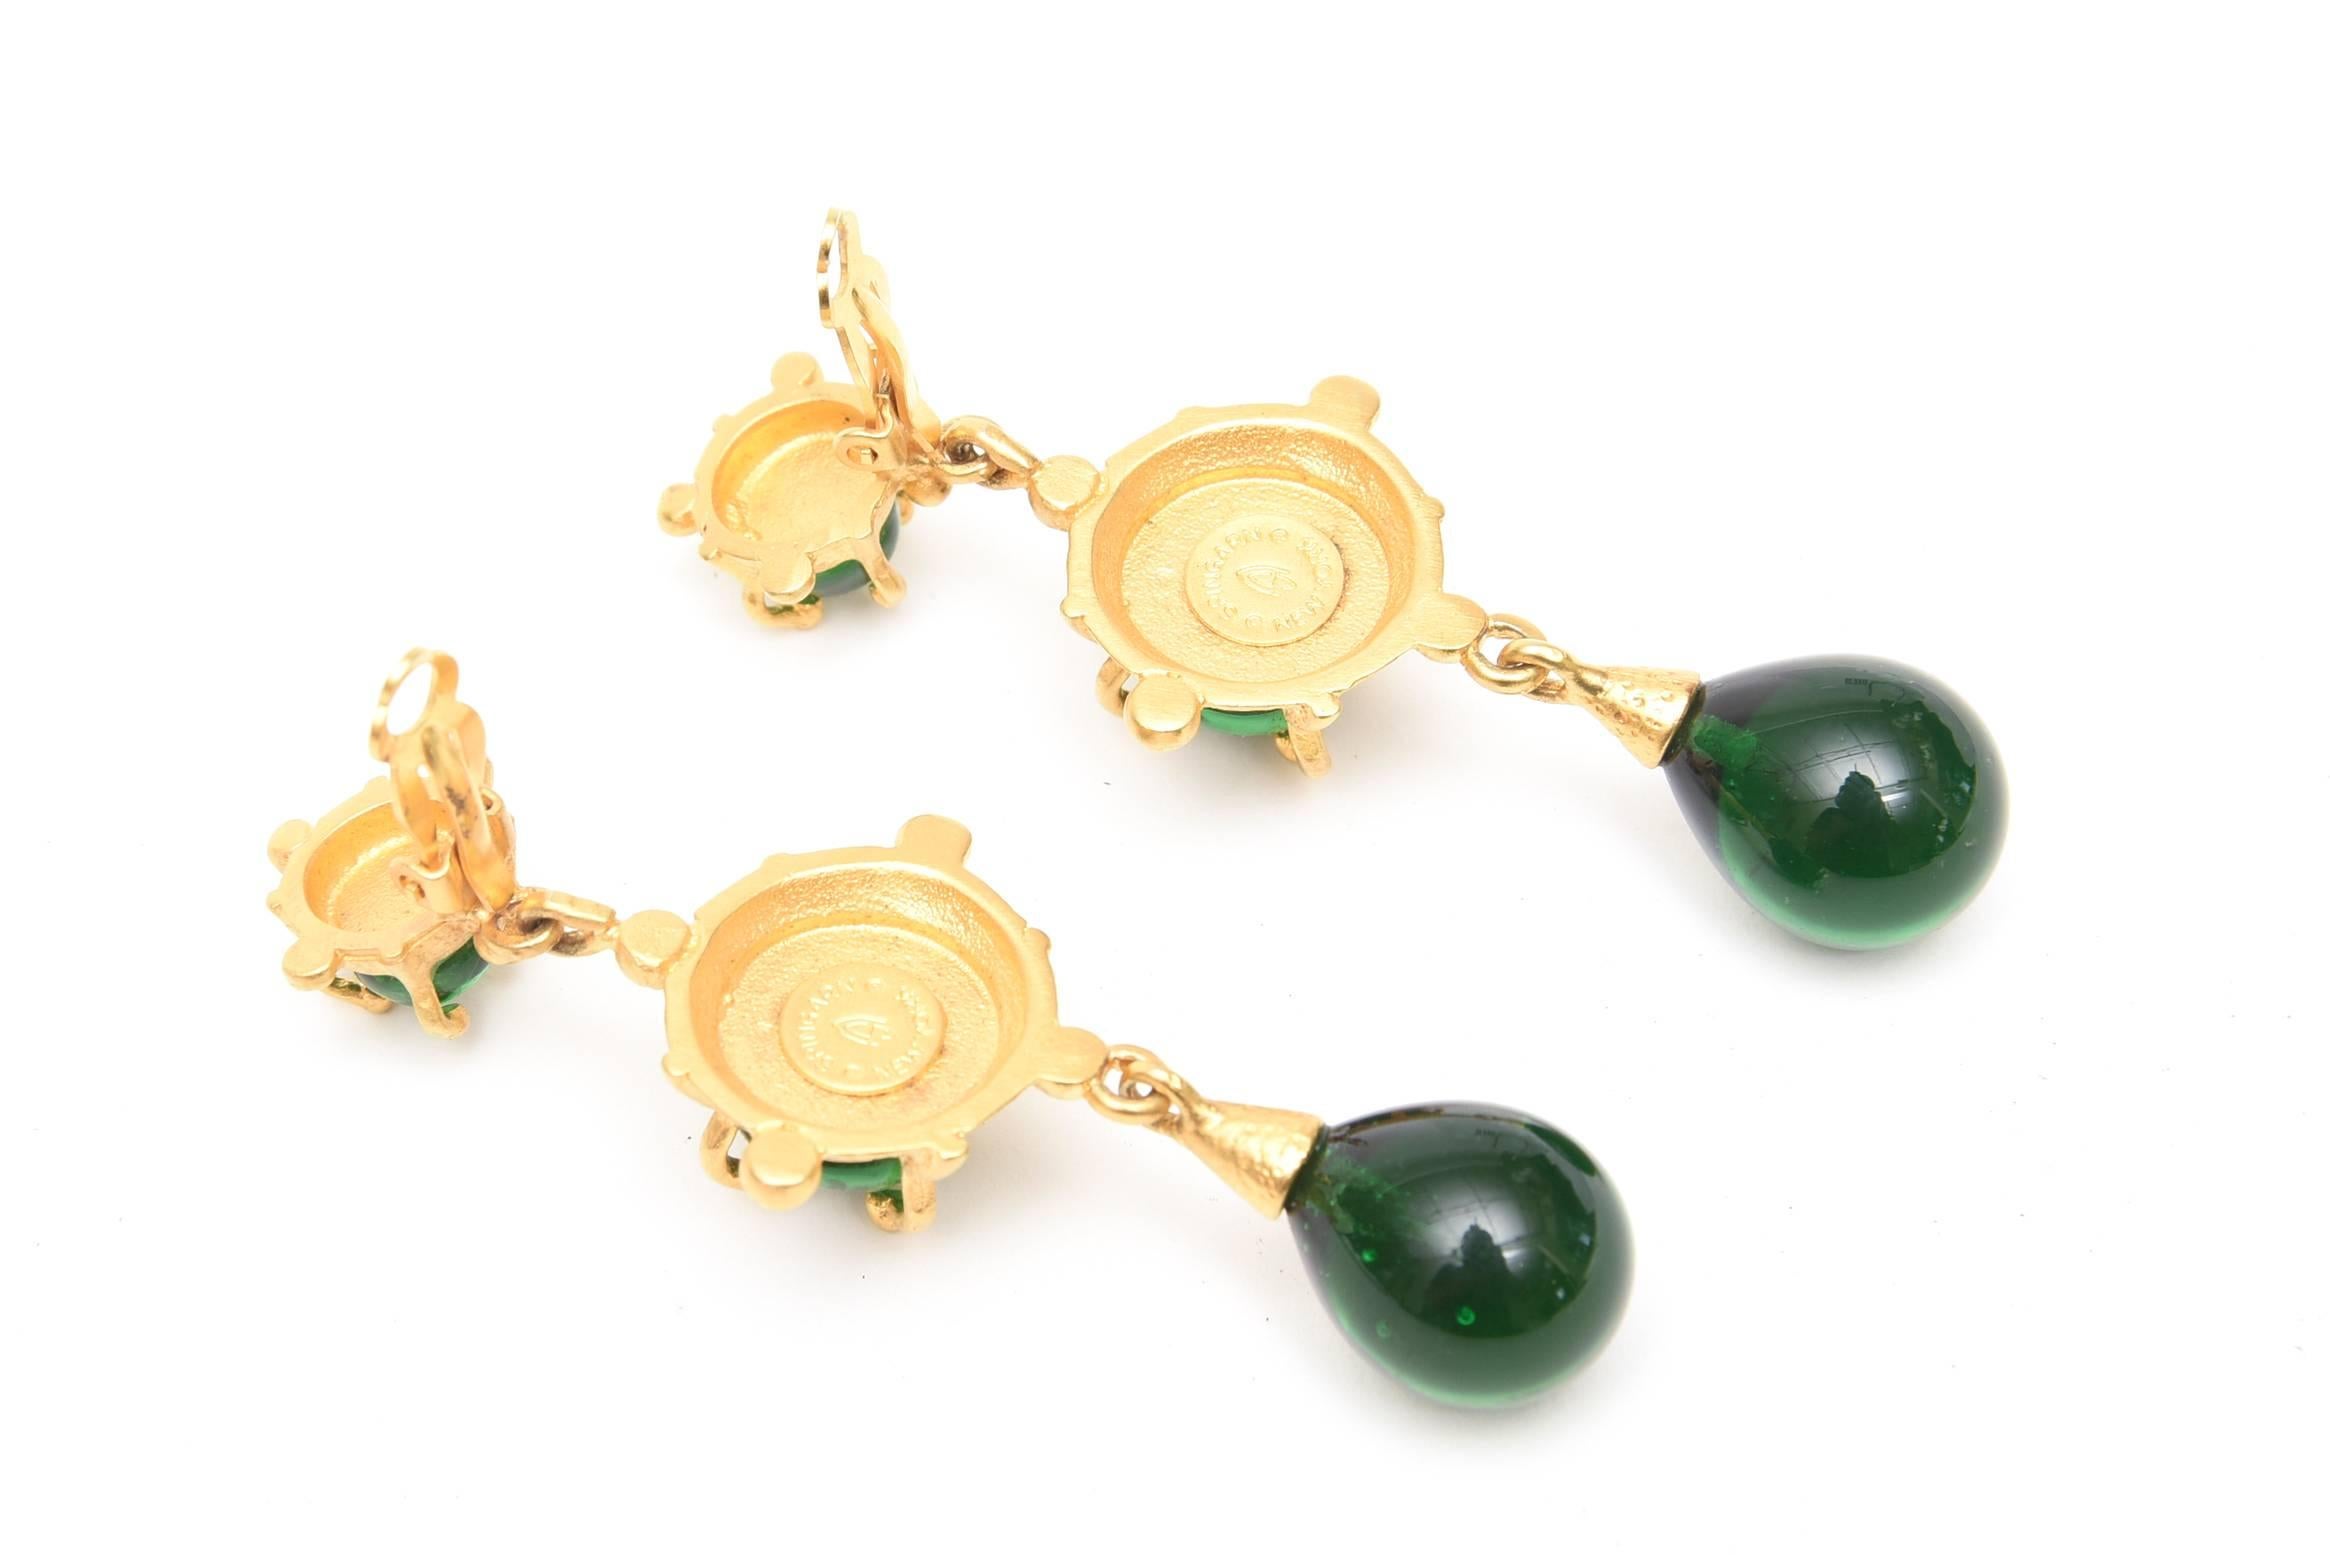  Andrew Spingarn Gold Plated With Green Glass Sculptural Necklace, Earrings Set For Sale 4